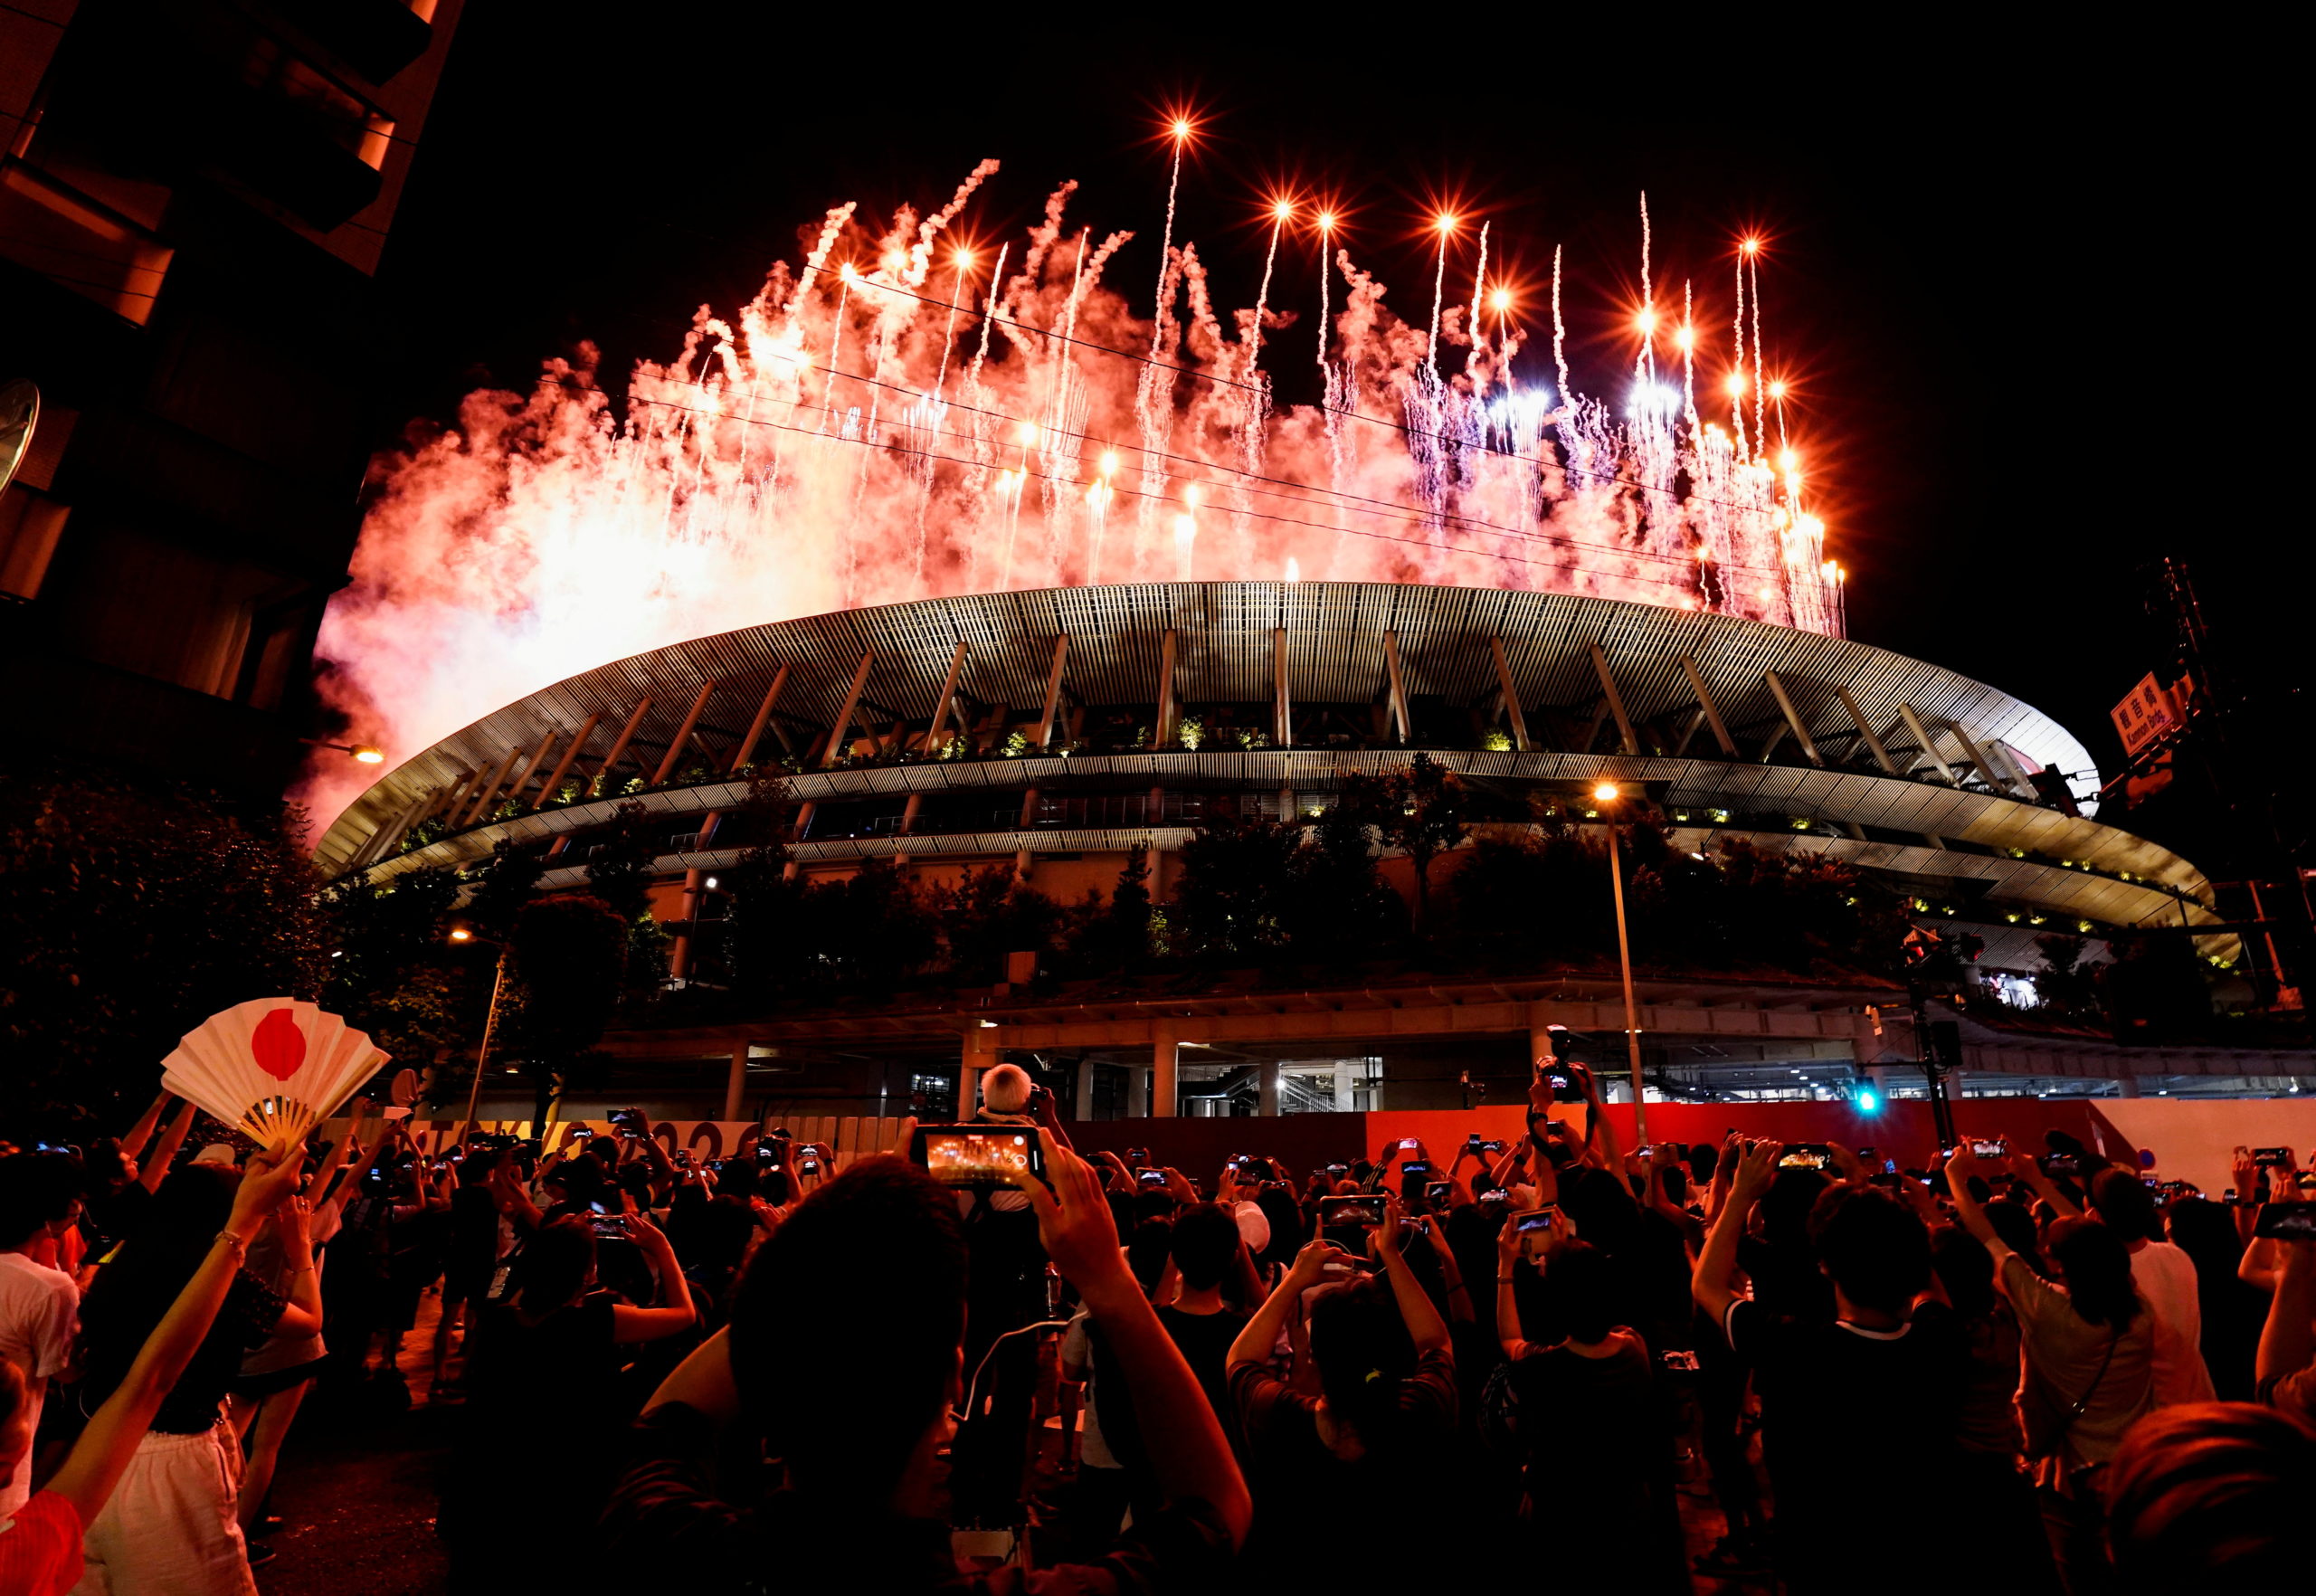 FILE PHOTO: Tokyo 2020 Olympics - The Tokyo 2020 Olympics Opening Ceremony - Olympic Stadium, Tokyo, Japan - July 23, 2021. Fireworks are seen from outside the stadium during the Opening Ceremony